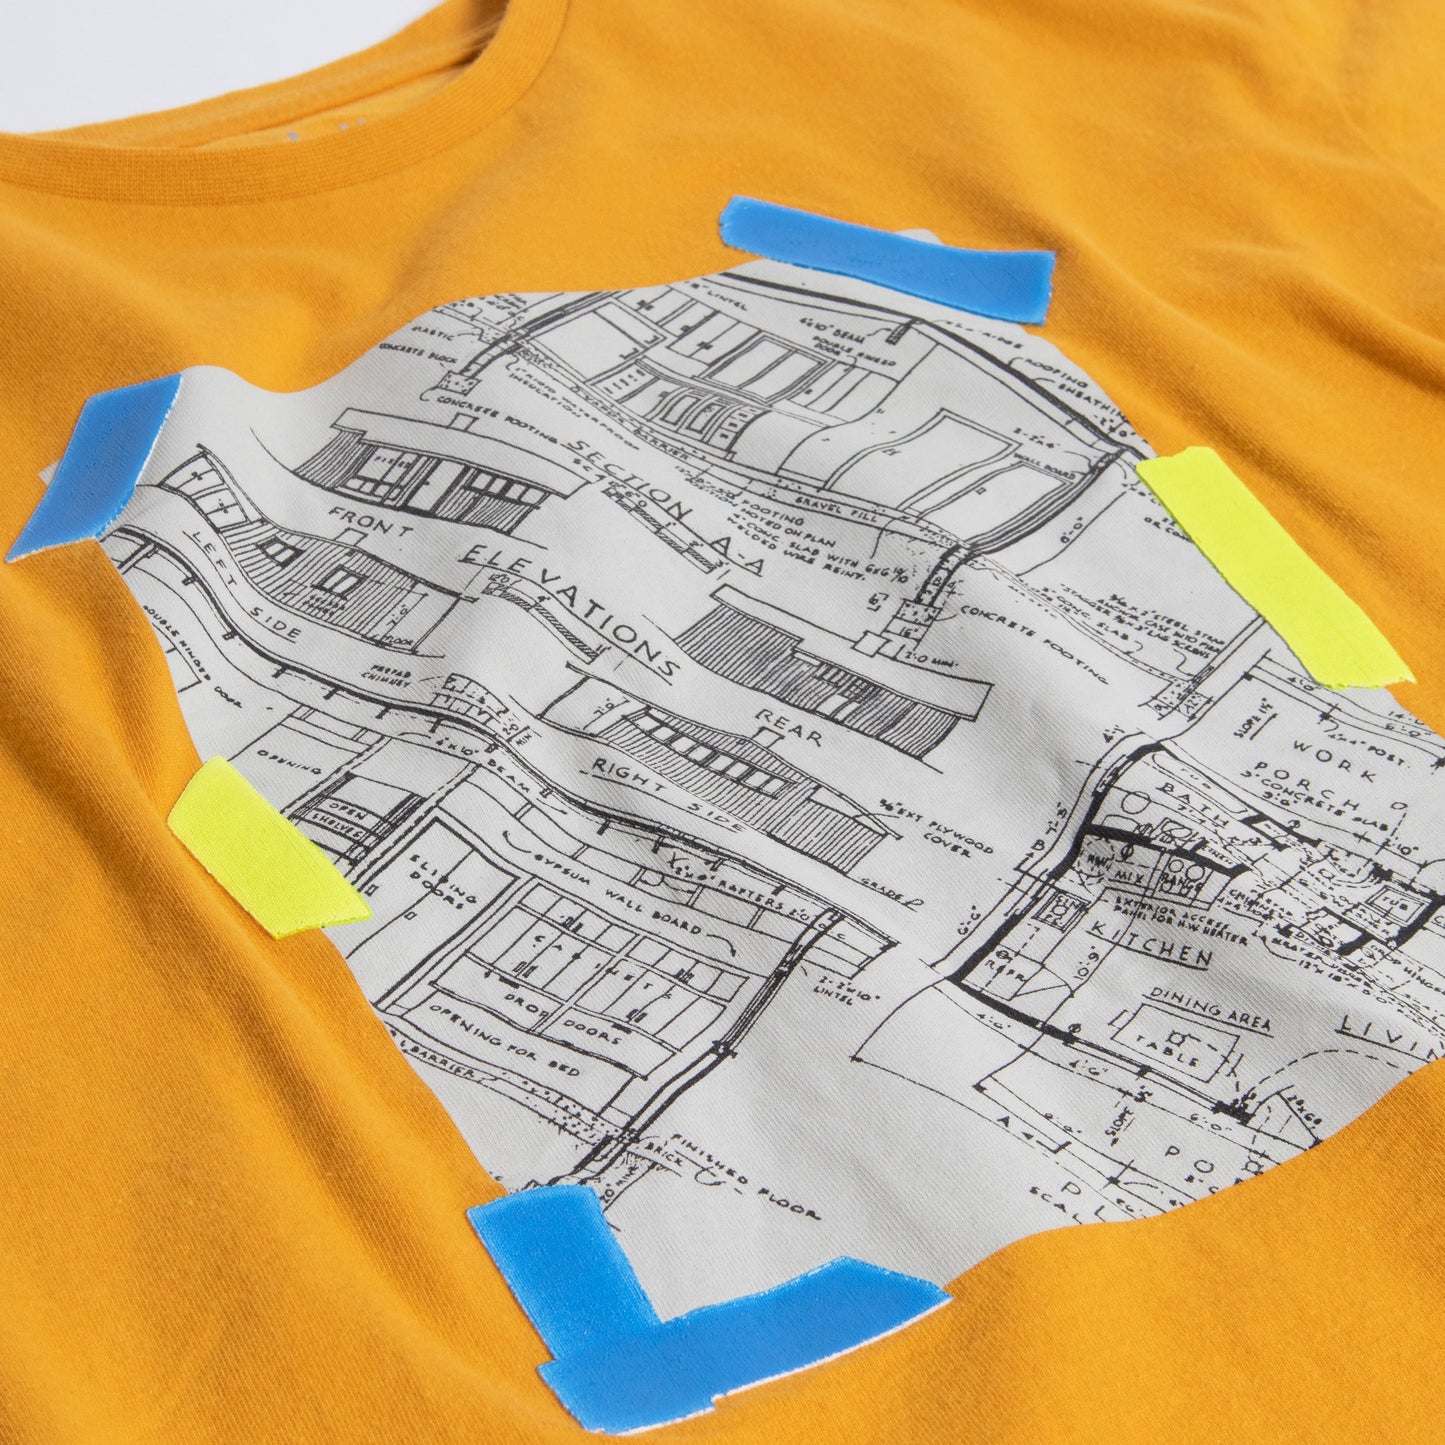 Architectural Oversized Tee